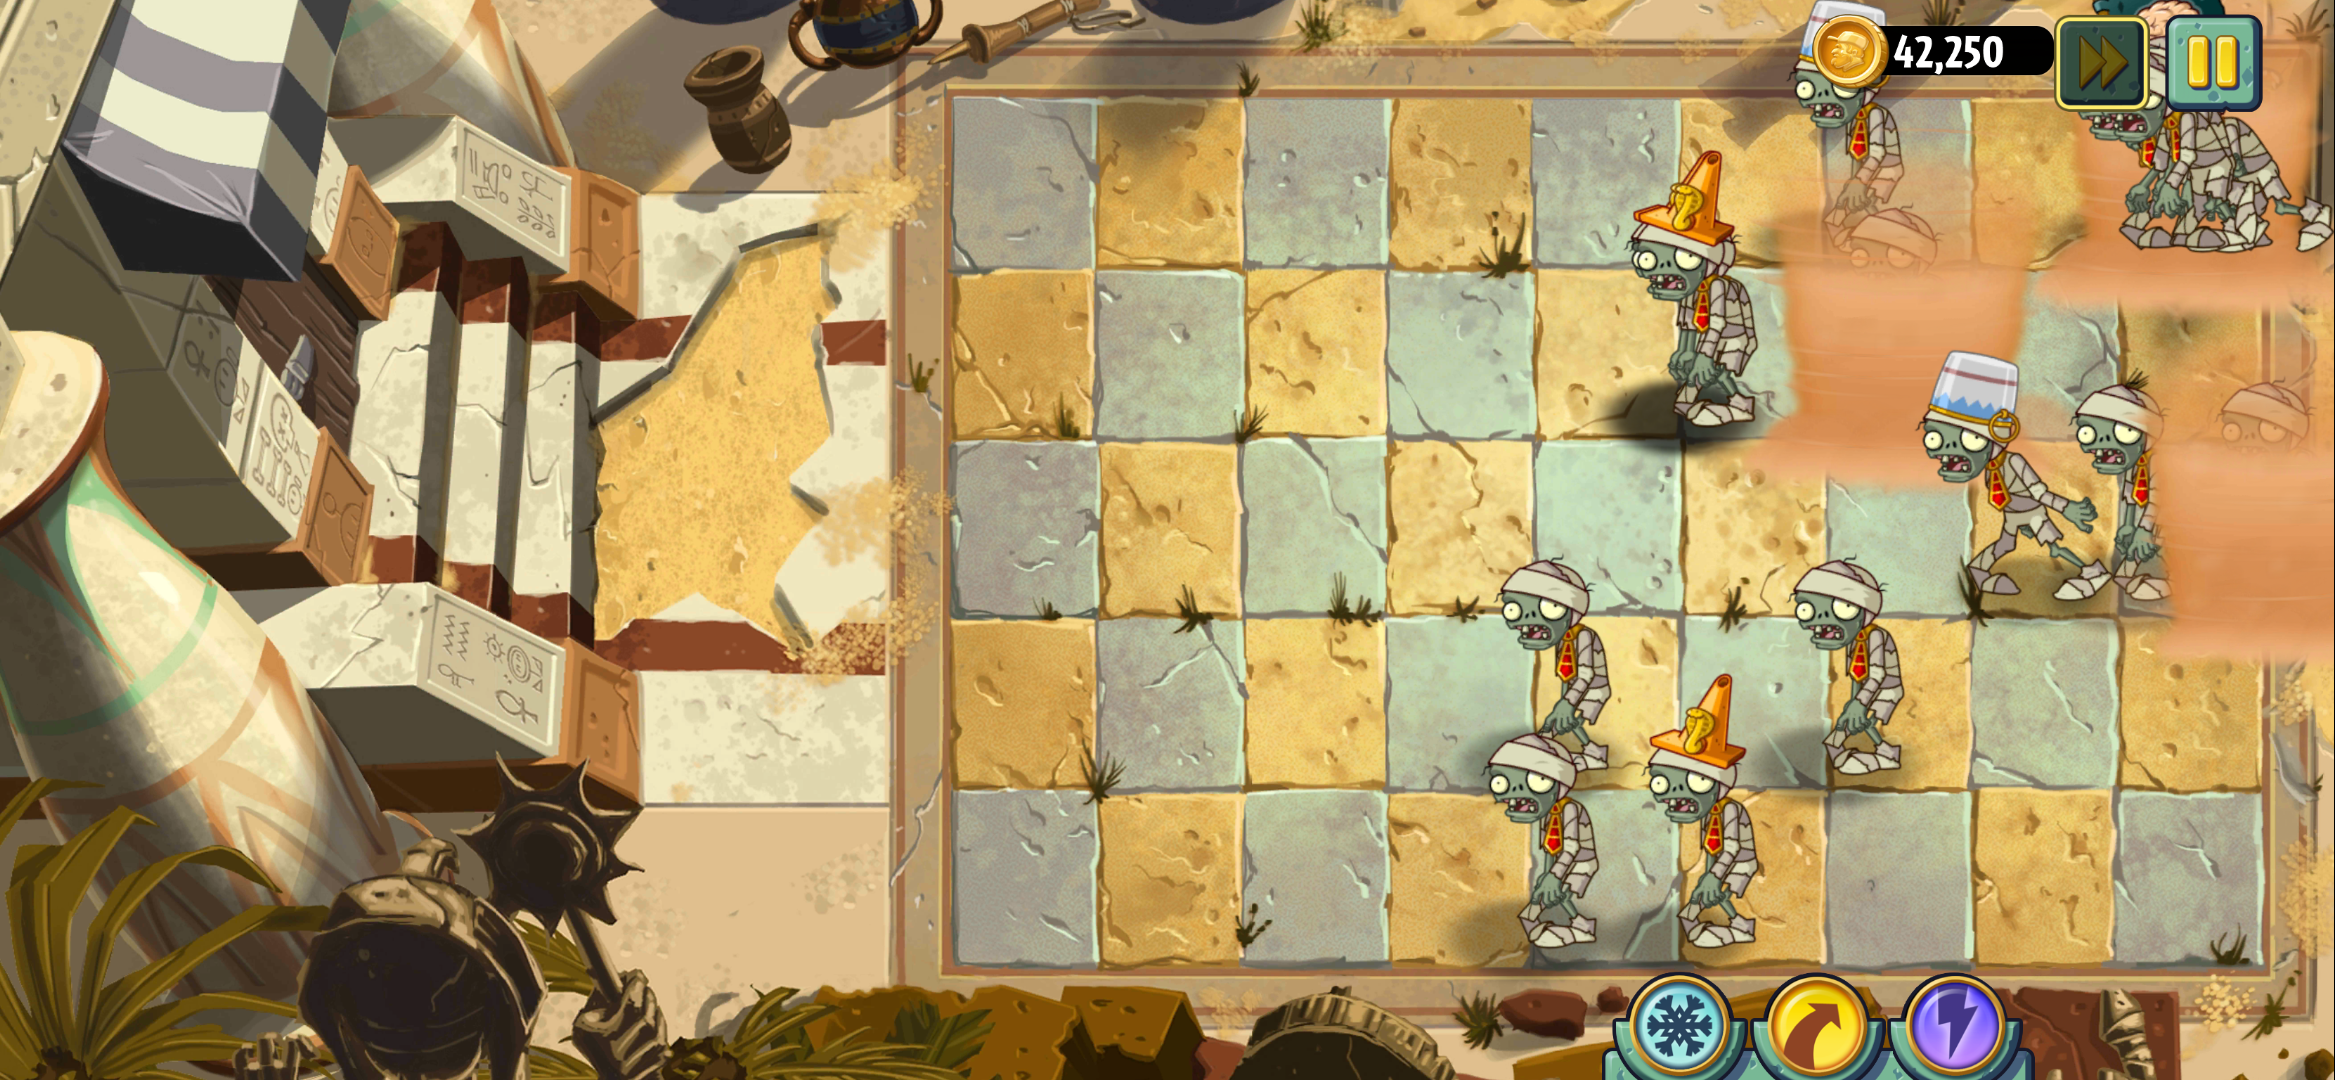 Ancient Egypt - Day 4, Plants vs. Zombies Wiki